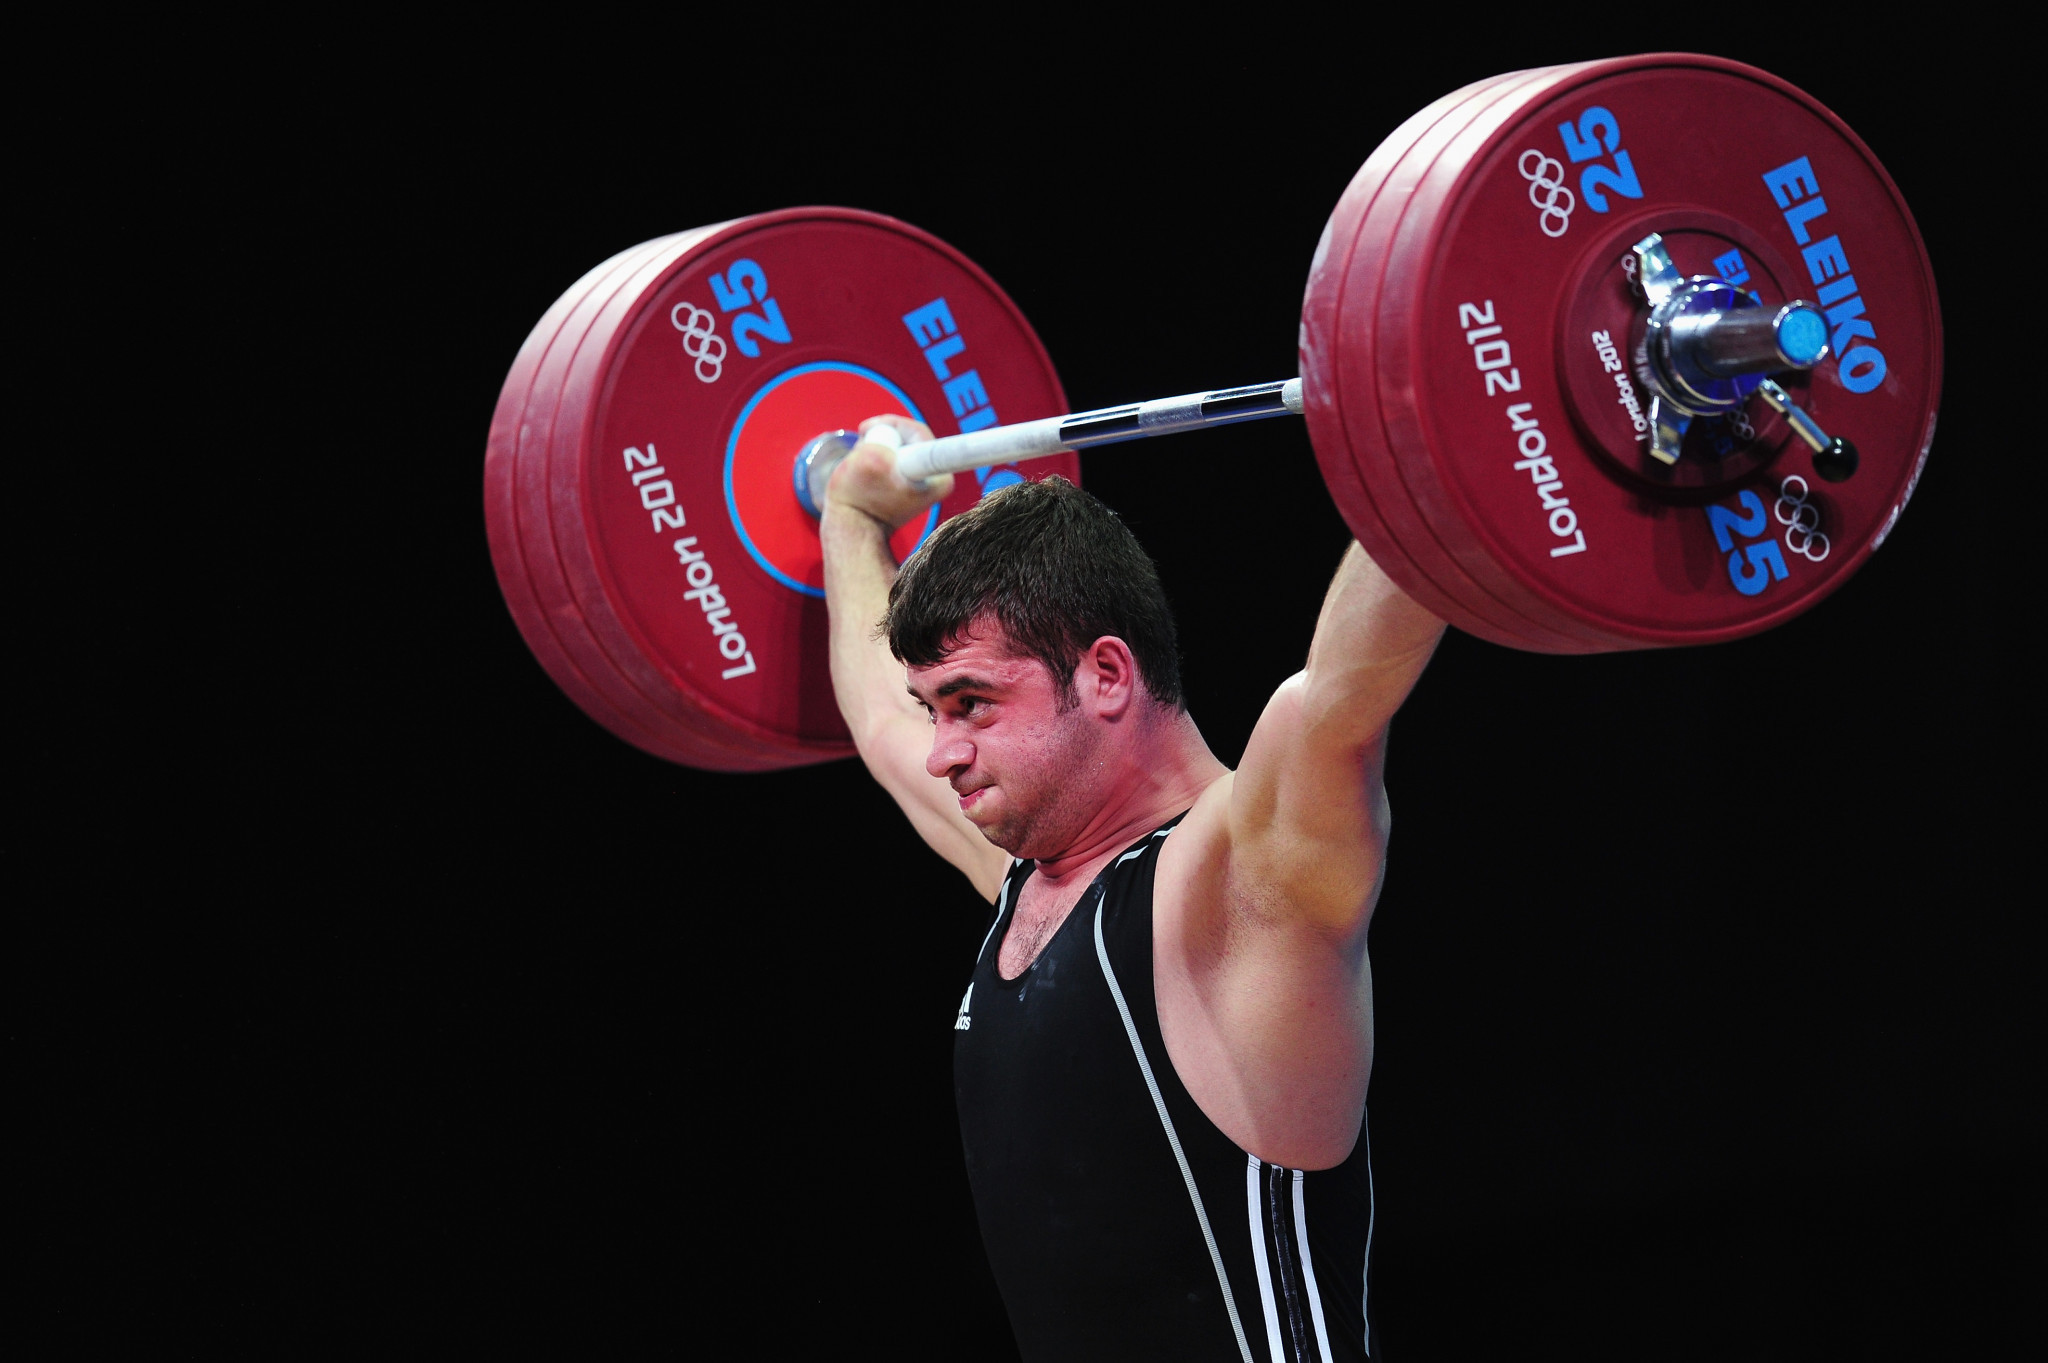 Saeid Mohammadpour won a London 2012 gold medal only after four athletes who finished ahead of him were disqualified for doping ©Getty Images